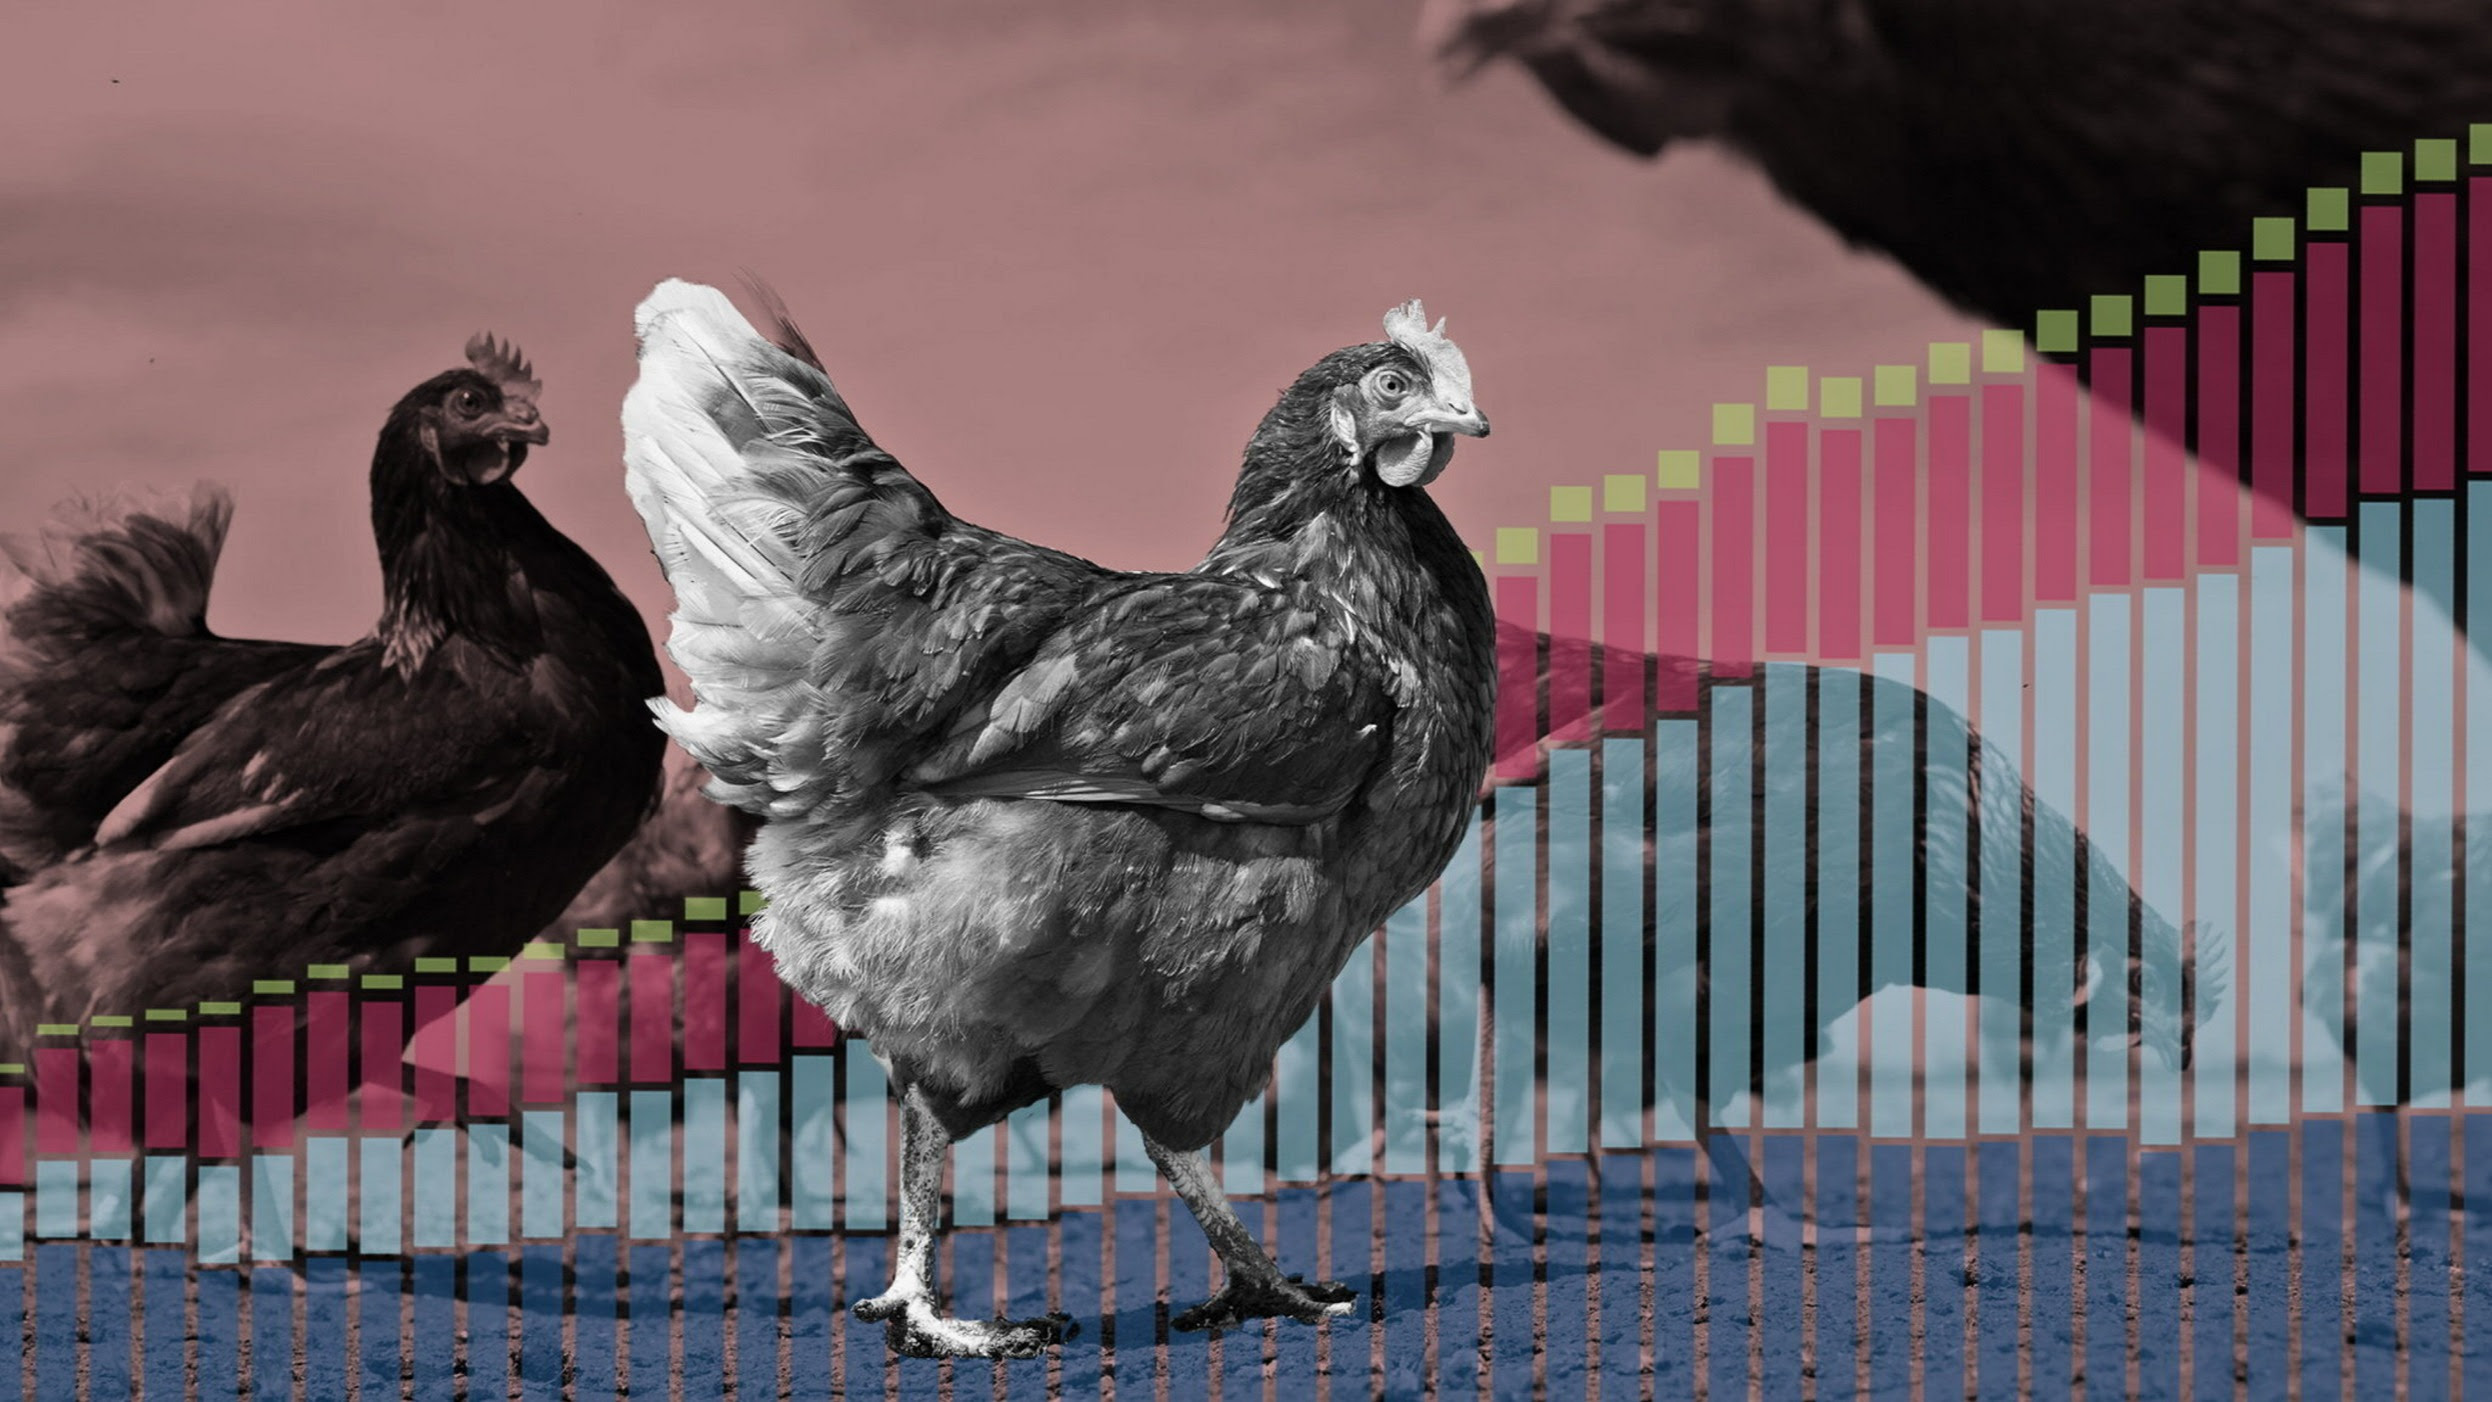 Pecking order: chicken now outstrips any other meat consumption worldwide 